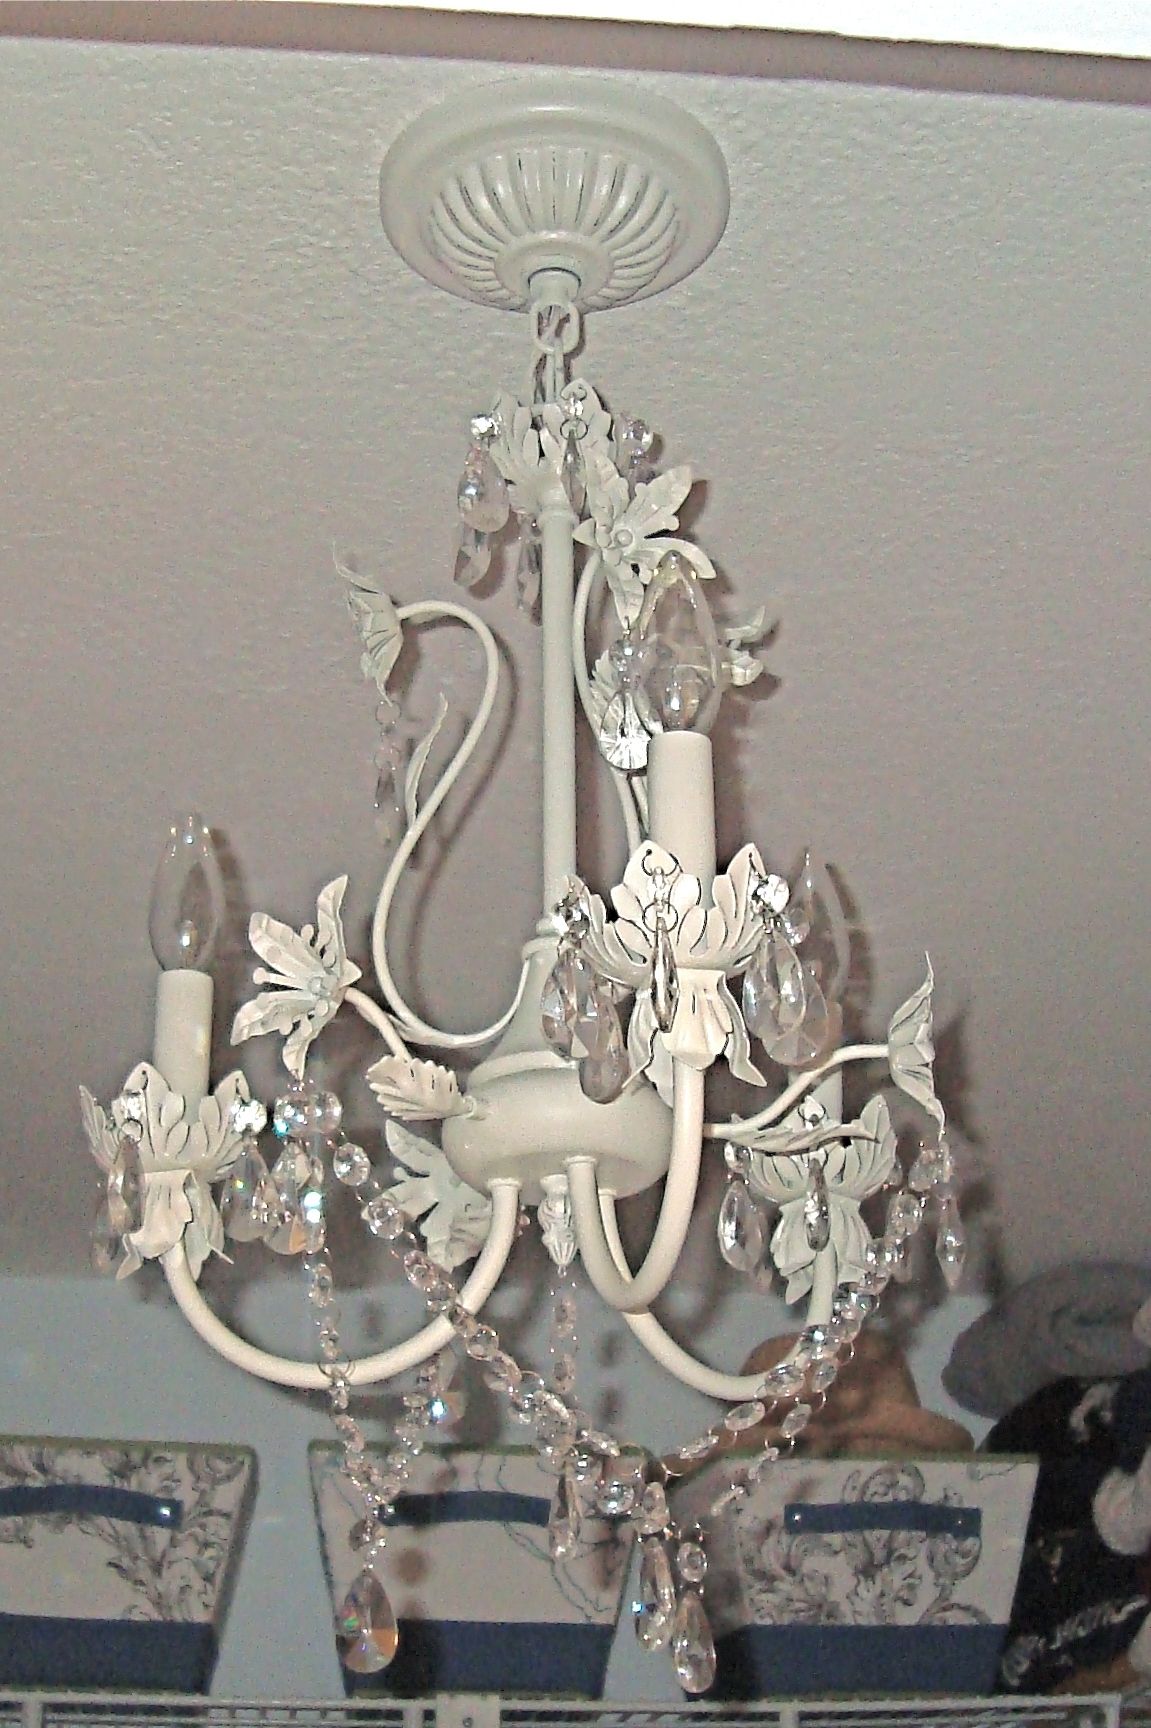 Small Shabby Chic Chandelier With Regard To Current Lamp Chandelier Shabby Chic – Closdurocnoir (View 2 of 20)